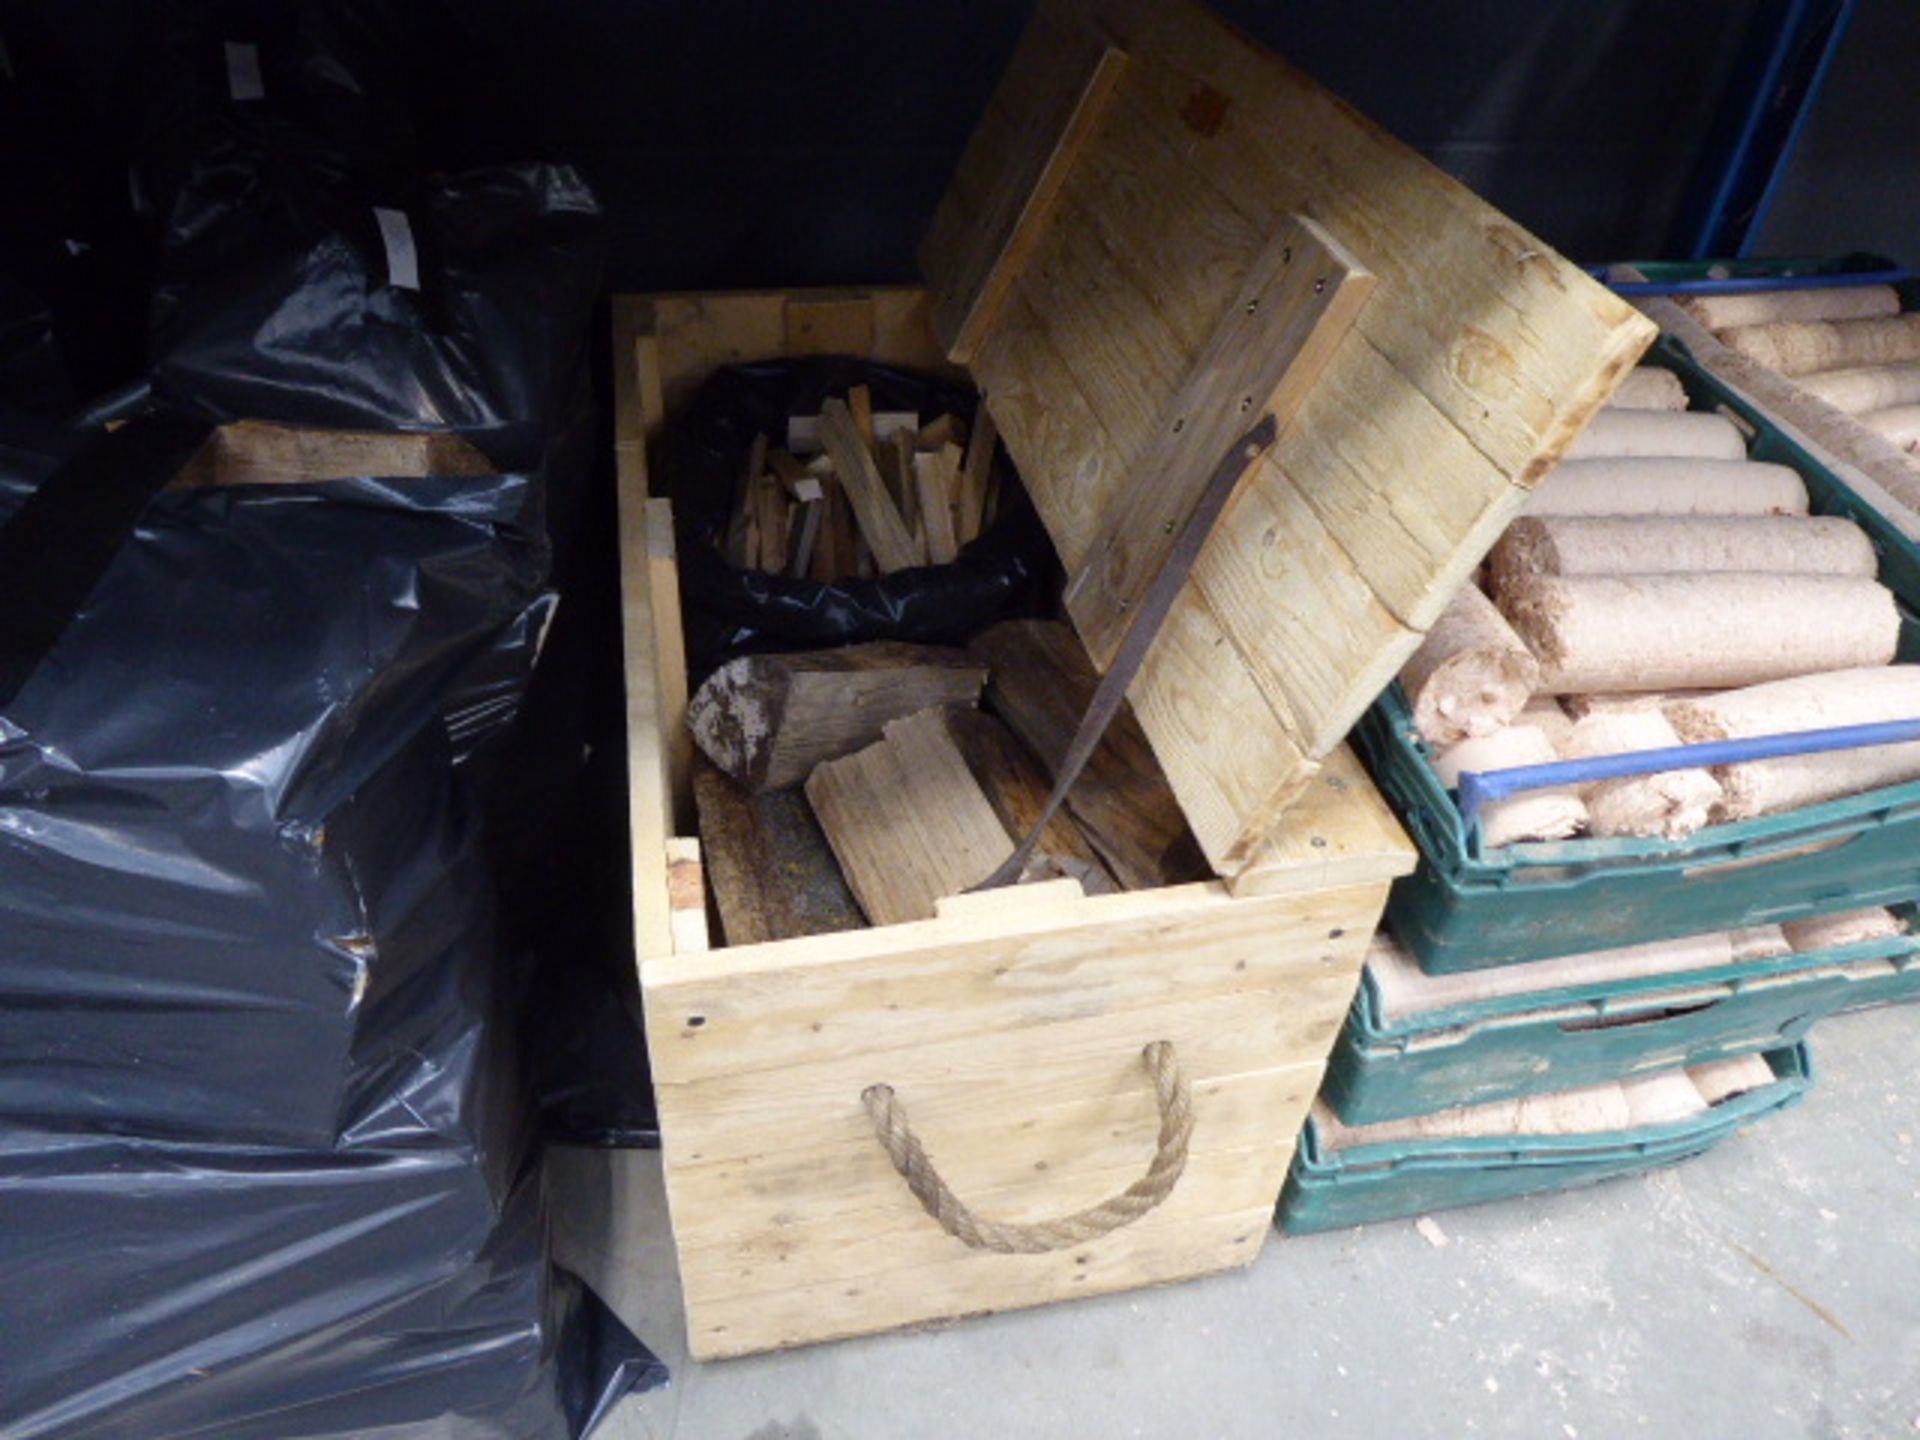 3 large bags and large wooden box of kindling